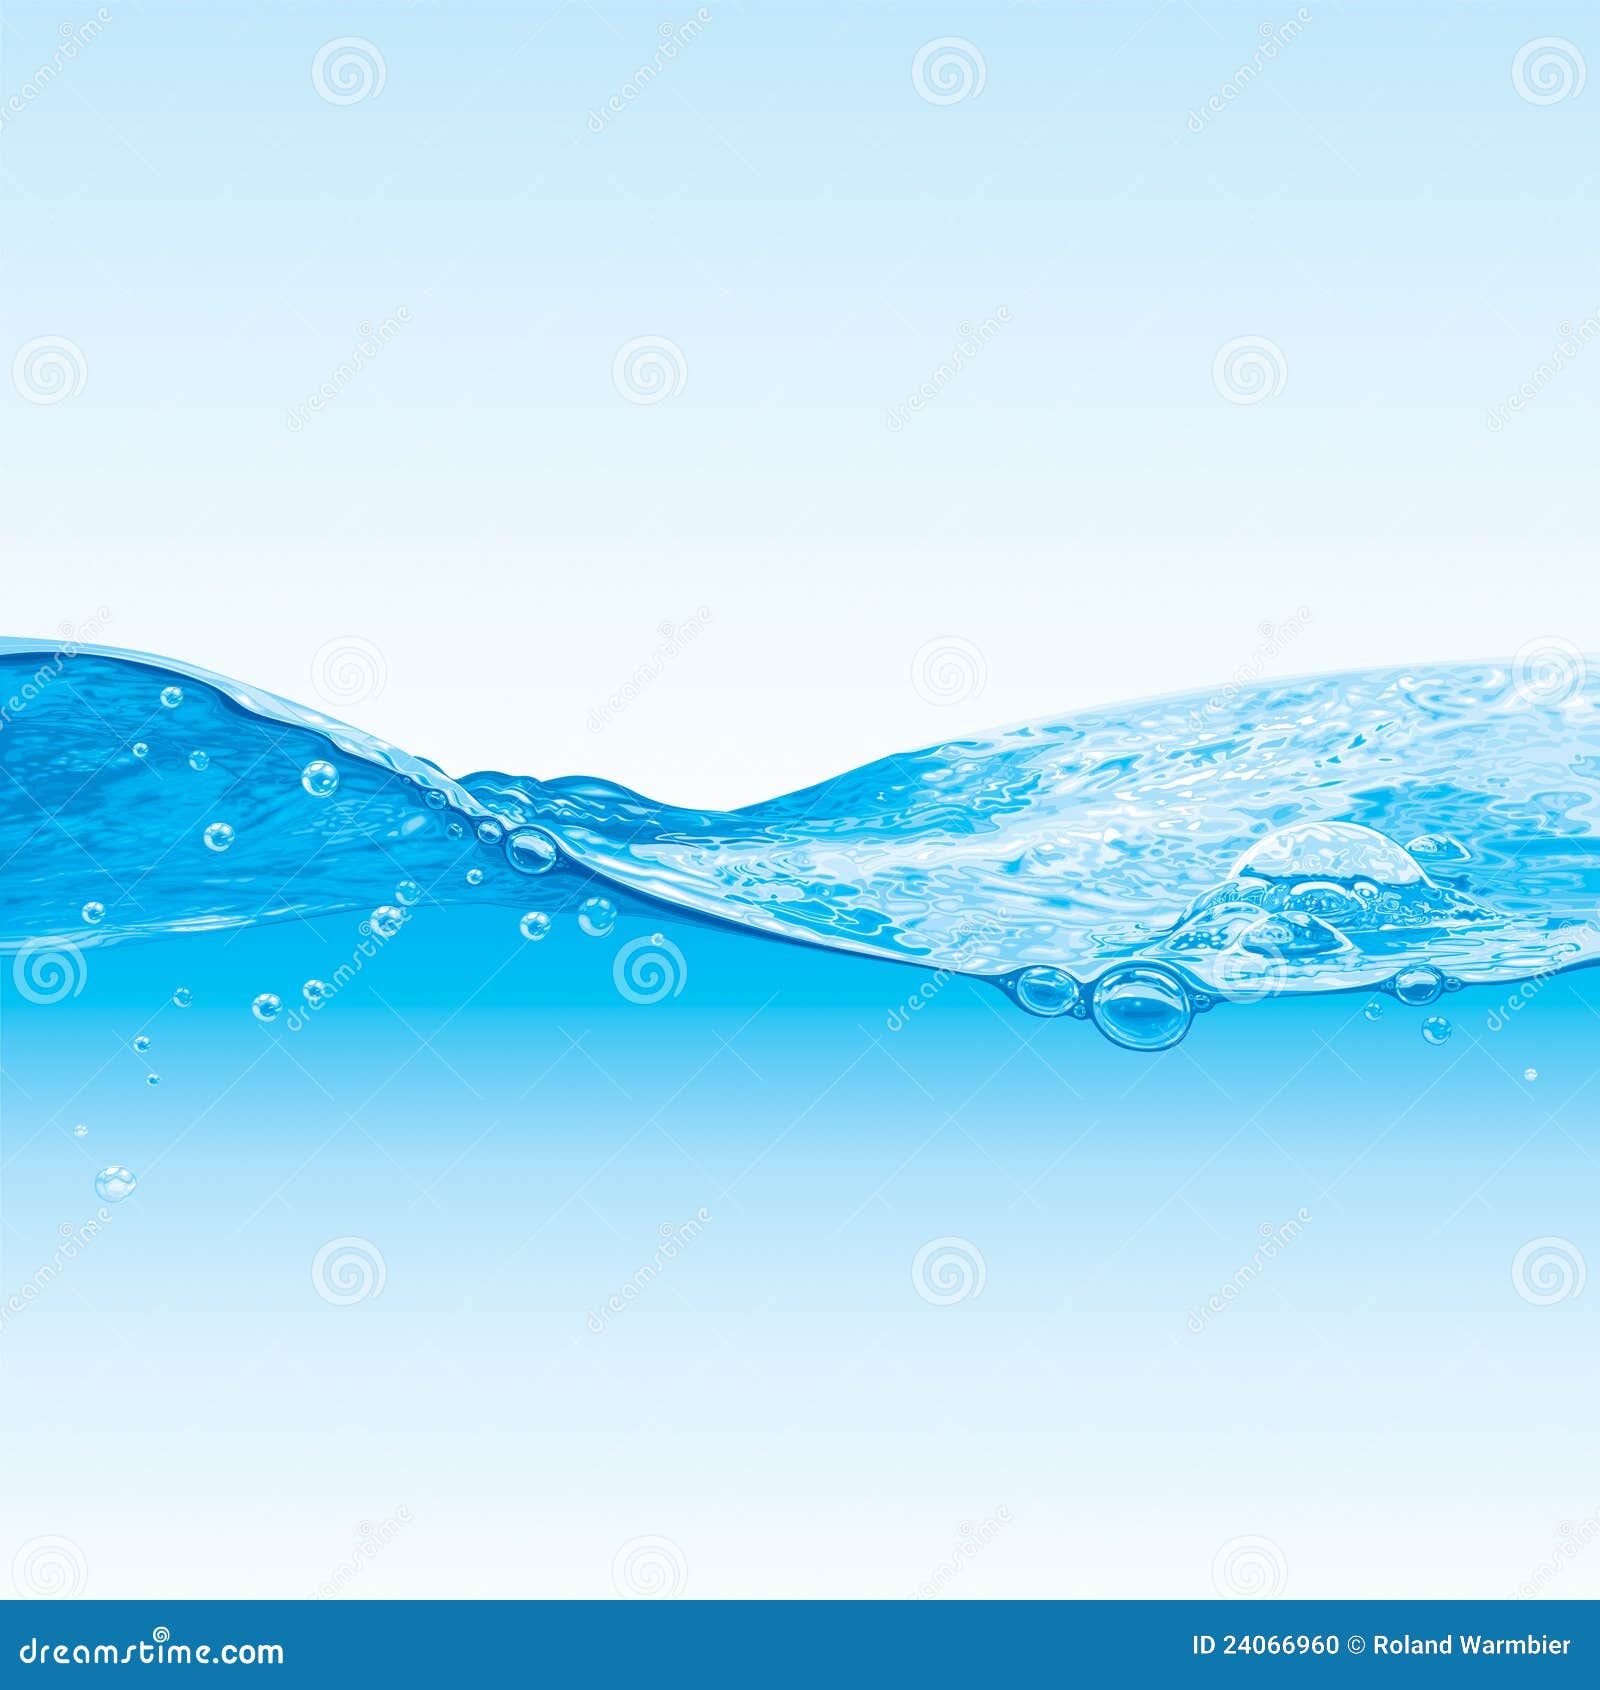 water wave background with bubbles